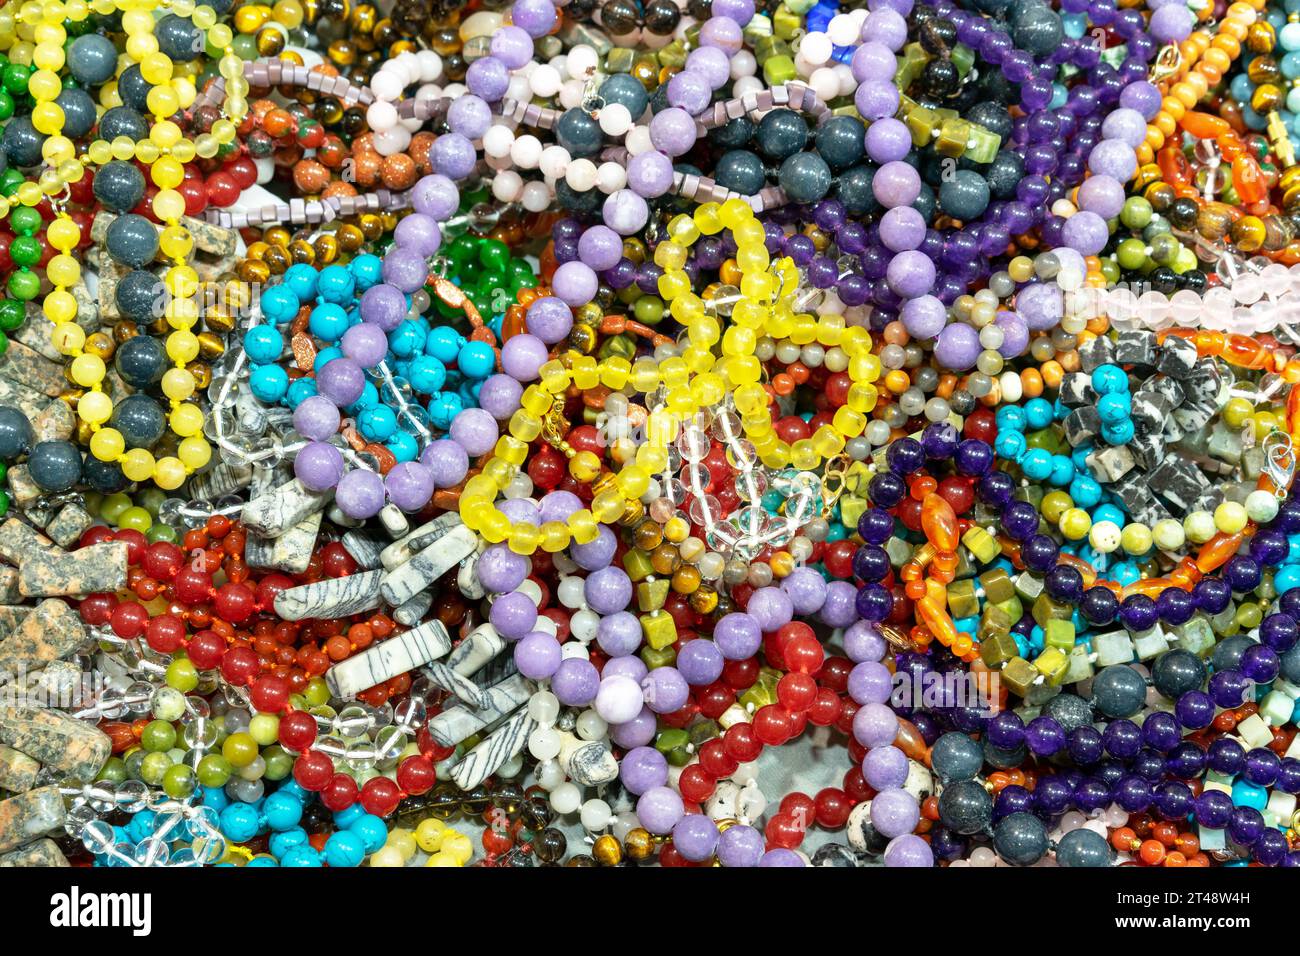 Beads made from various semi-precious stones. Jewelry background concept. Stock Photo